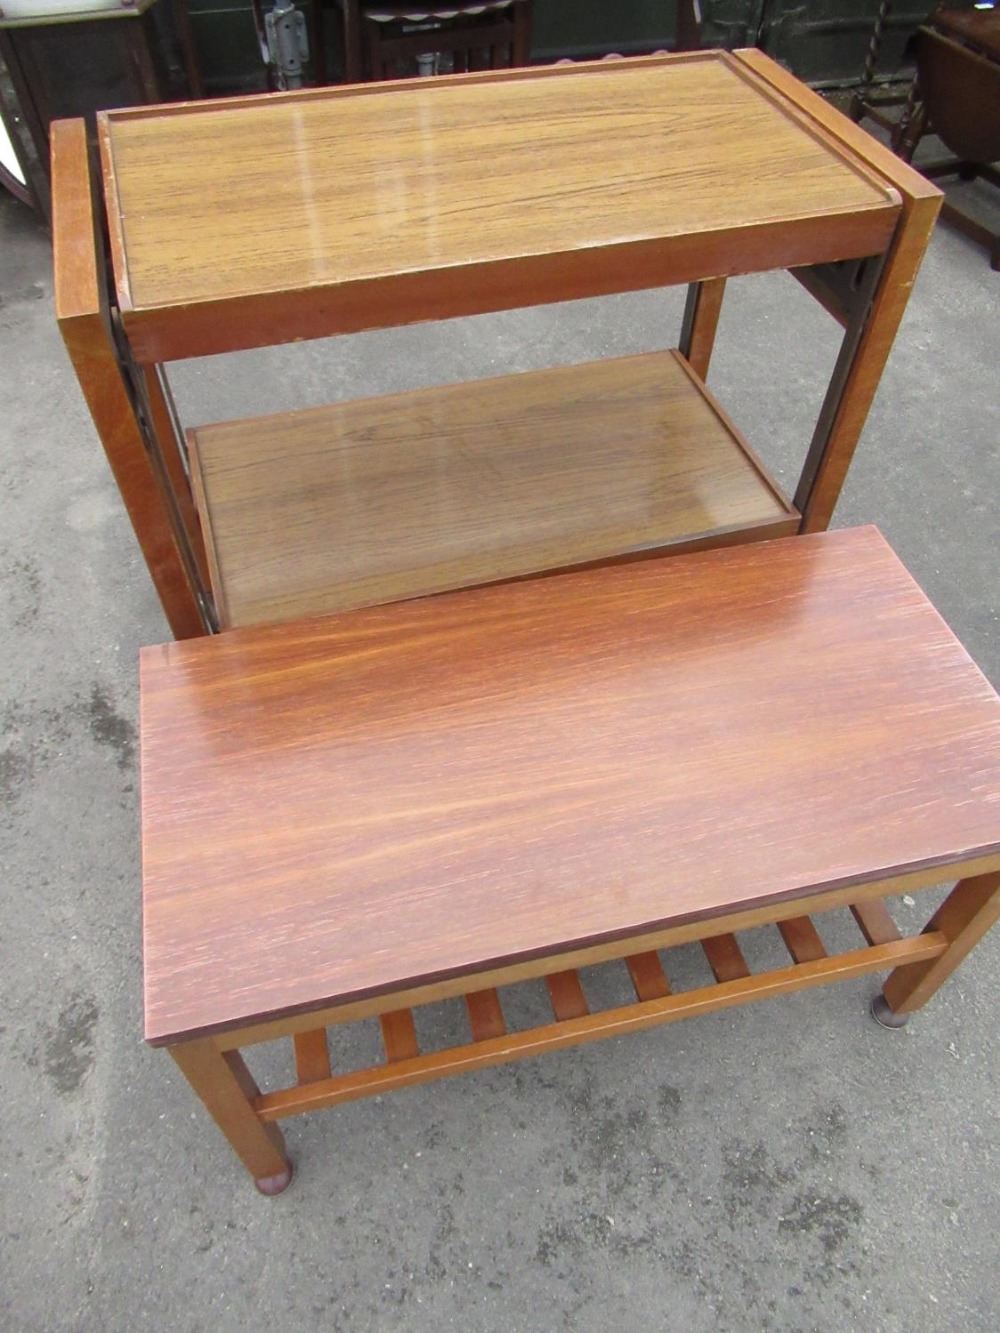 1960's Gibbs furniture, teak and laminate two tier coffee table, similar cantilever tea trolley (2)